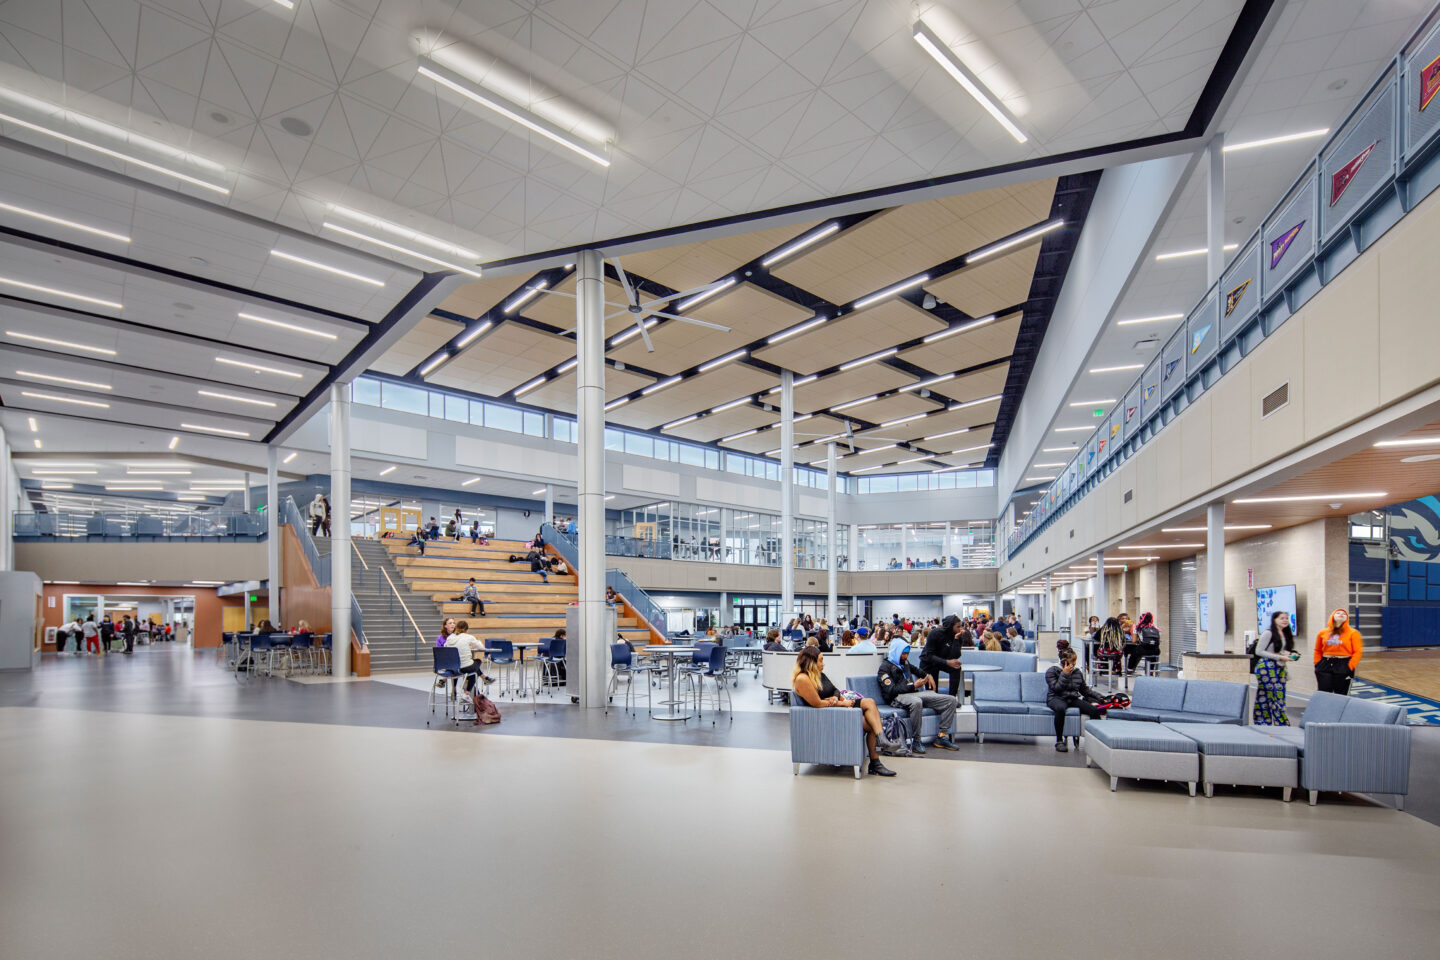 Cafeteria with vaulted, intricate ceilings, connected to collaboration spaces and a learning stair